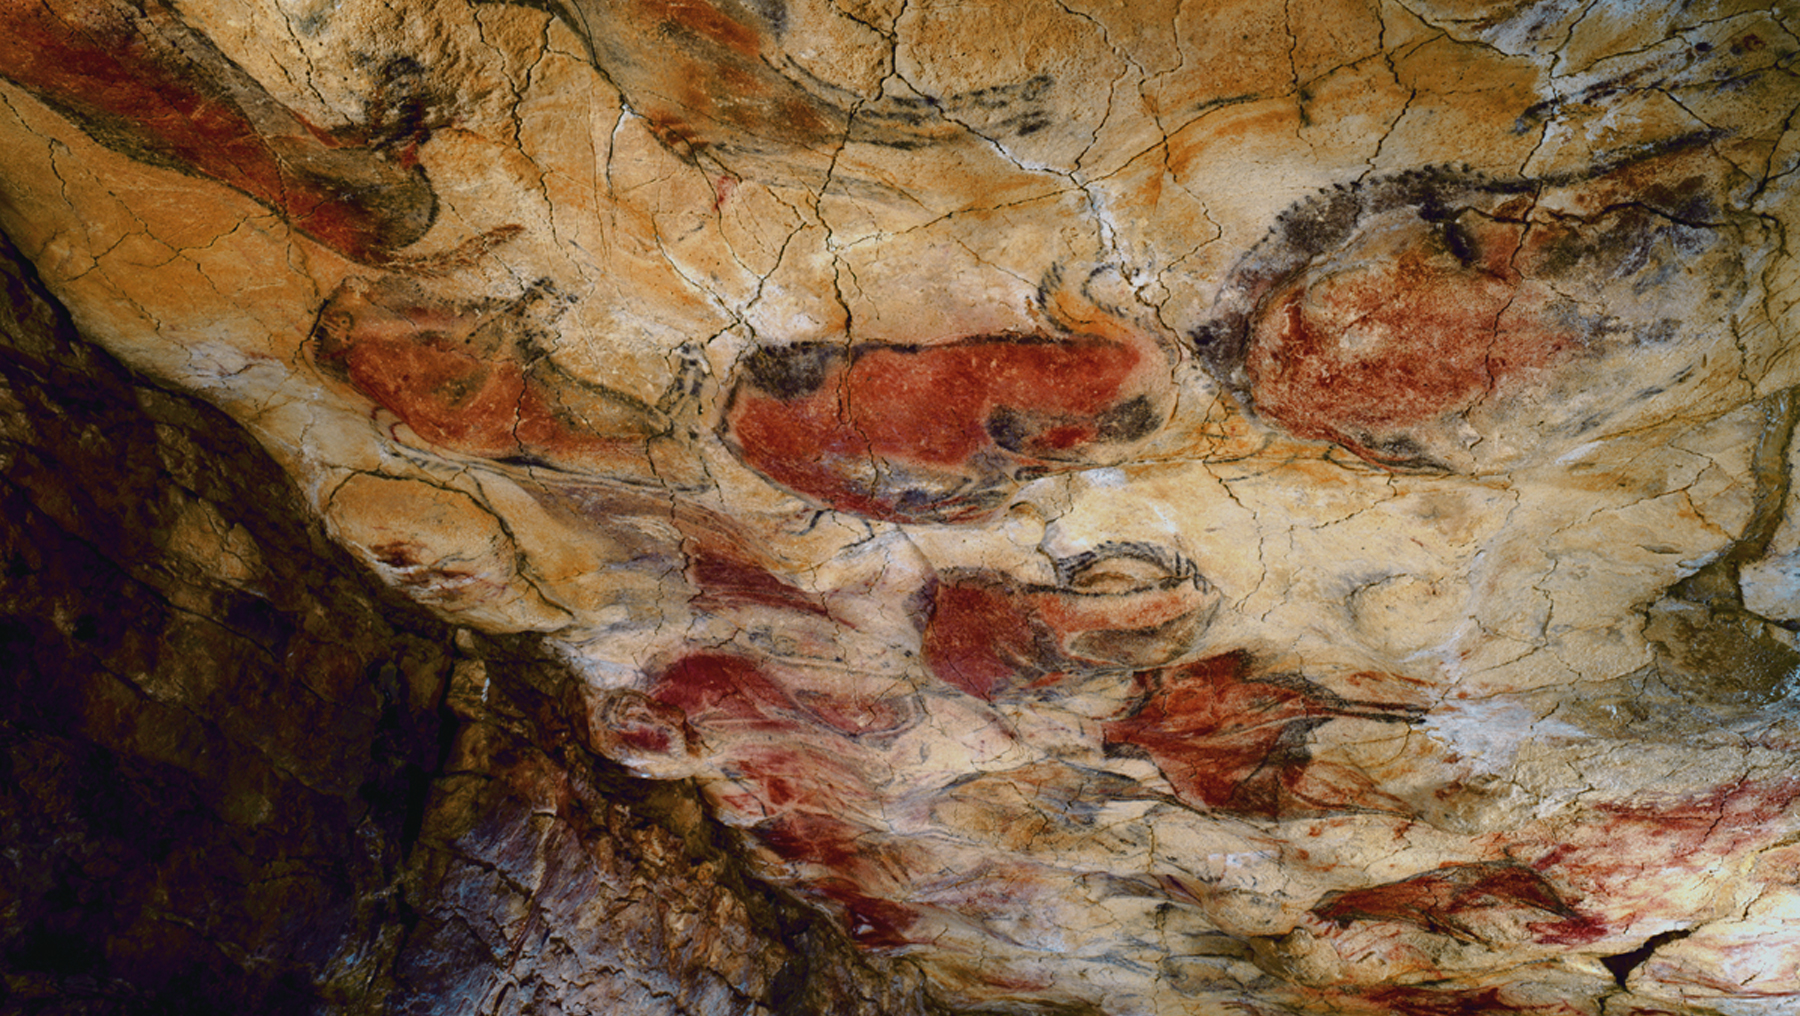 Polychrome ceiling in the cave of Altamira